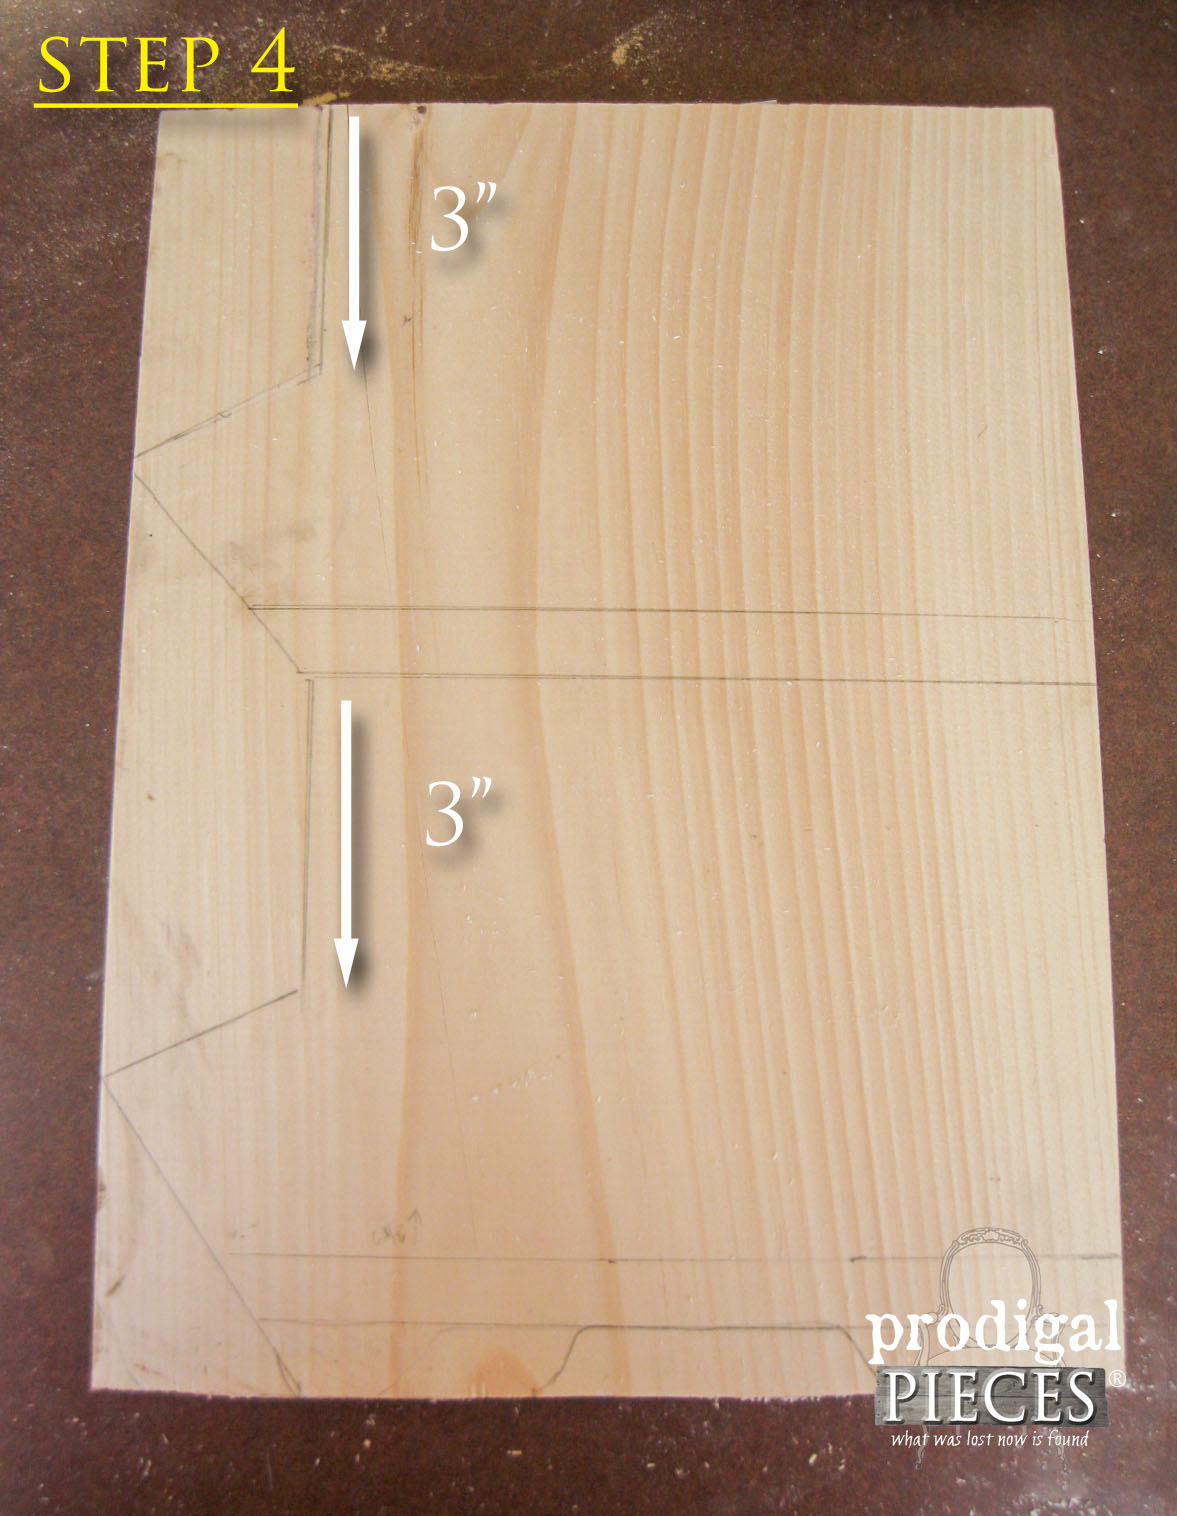 Step 4 of Building Wooden Bin by Prodigal Pieces | www.prodigalpieces.com